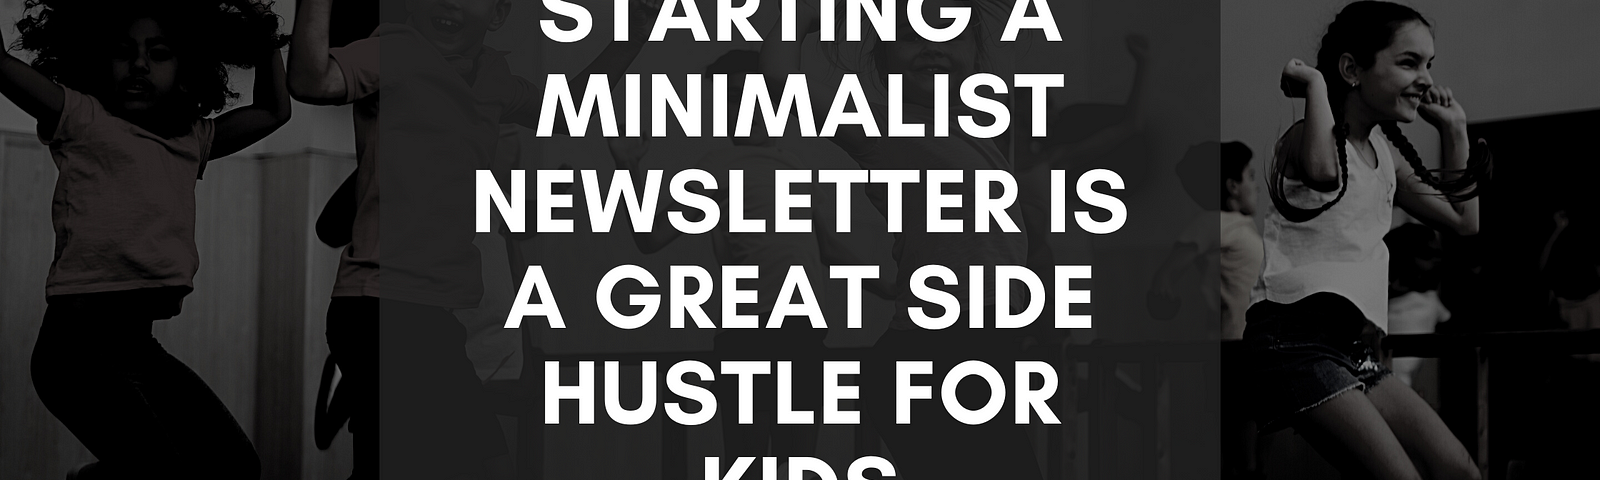 Starting a Minimalist Newsletter Is a Great Side Hustle For Kids Heading with Kids Jumping in the Background